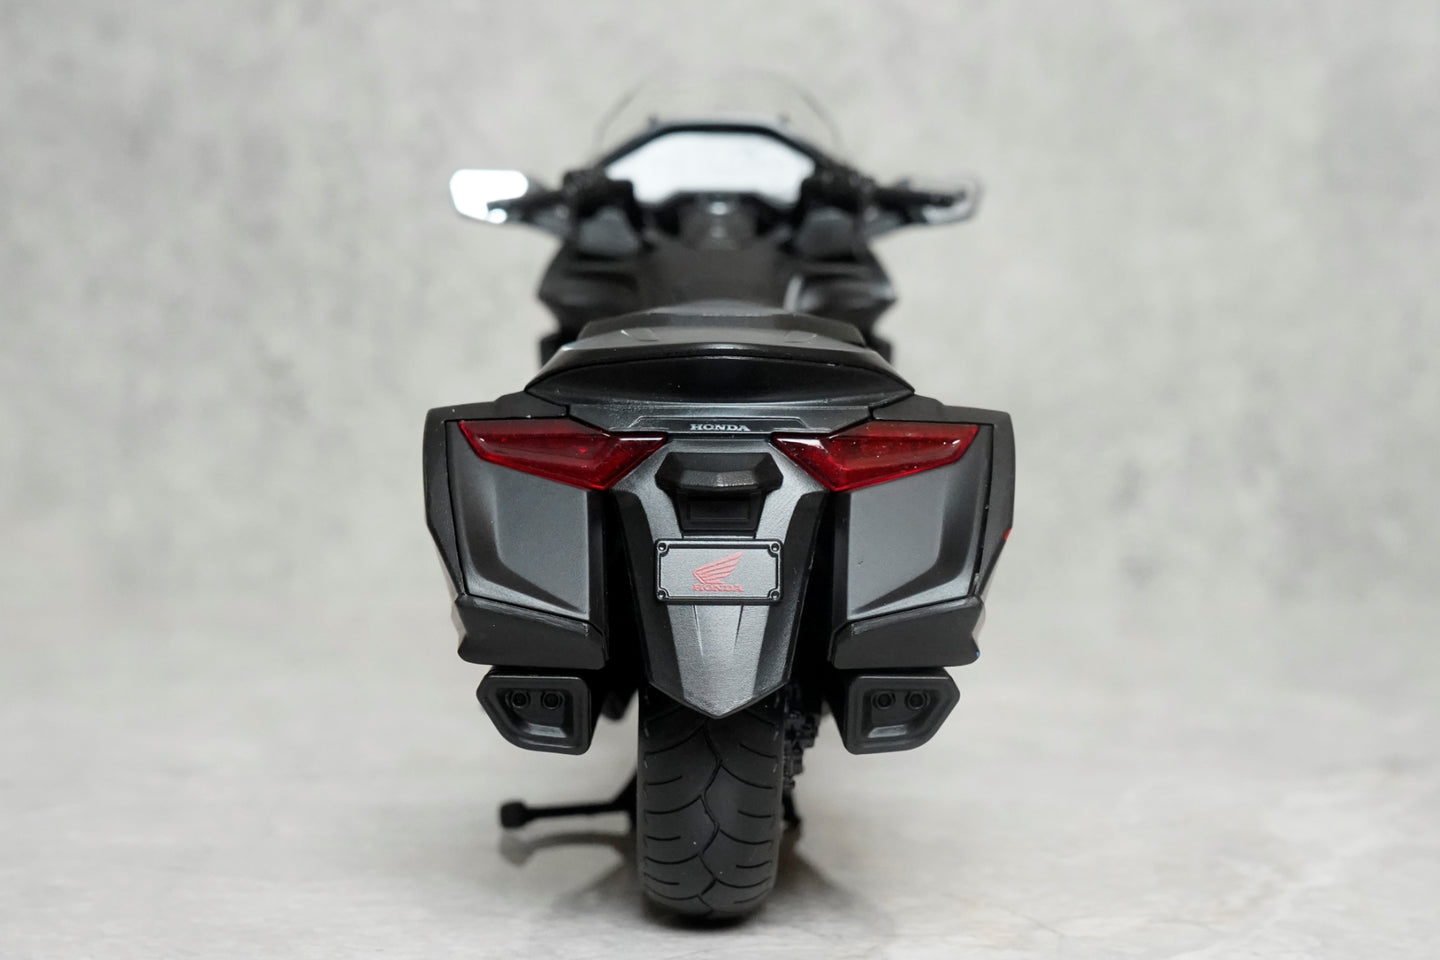 2020 Honda Gold Wing Diecast Bike 1:12 Motorcycle Model By Welly